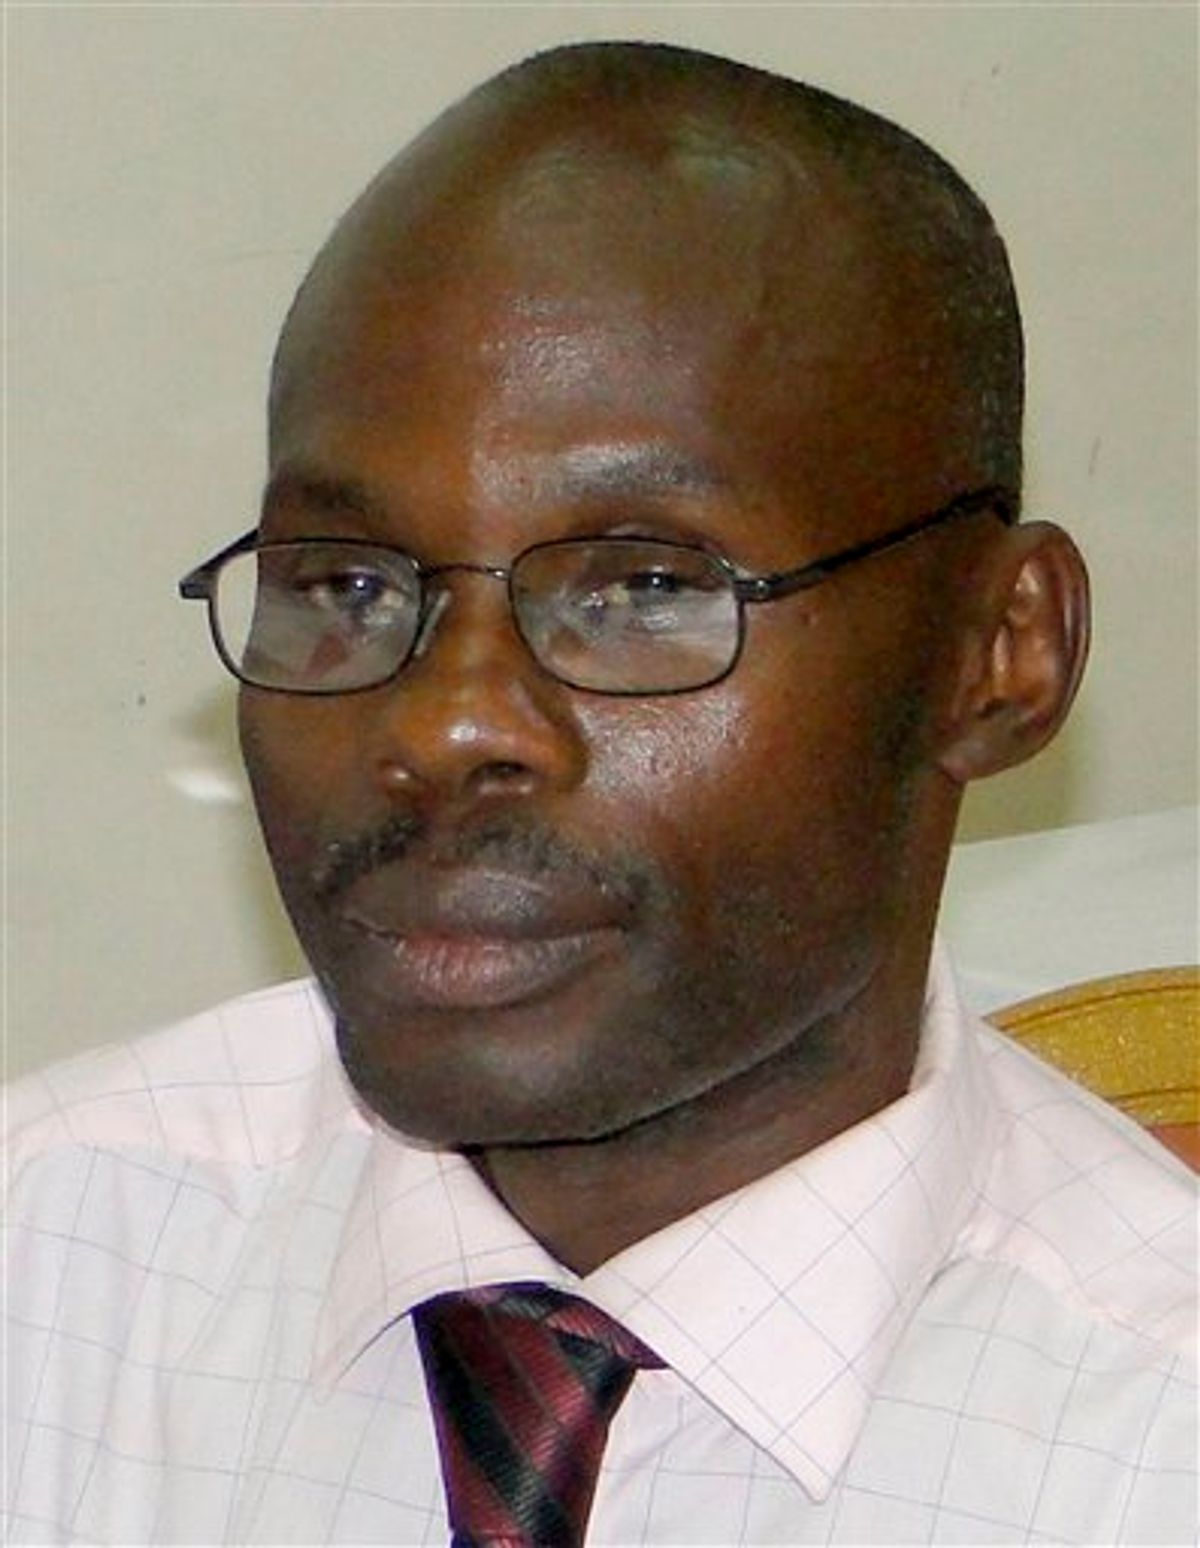 David Kato, seen in this undated photo, an advocacy officer for the gay rights group Sexual Minorities Uganda, was found with serious wounds to his head at his home in Uganda's capital Kampala, late Wednesday Jan 26, 2011, and later died of his injuries. A Ugandan tabloid newspaper called Rolling Stone listed a number of men they said were homosexuals last year, including Kato. Kato's picture was published on the front page, along with his name and a headline that said "Hang Them." A judge eventually barred the tabloid from printing such stories and photos. Homosexuality is illegal in Uganda and gay men and women face regular harassment. A controversial bill introduced in 2009 and still before the country's parliament would see the death penalty introduced for certain homosexual acts. The bill prompted international opposition and it hasn't come up for a vote.(AP Photo)  (AP)